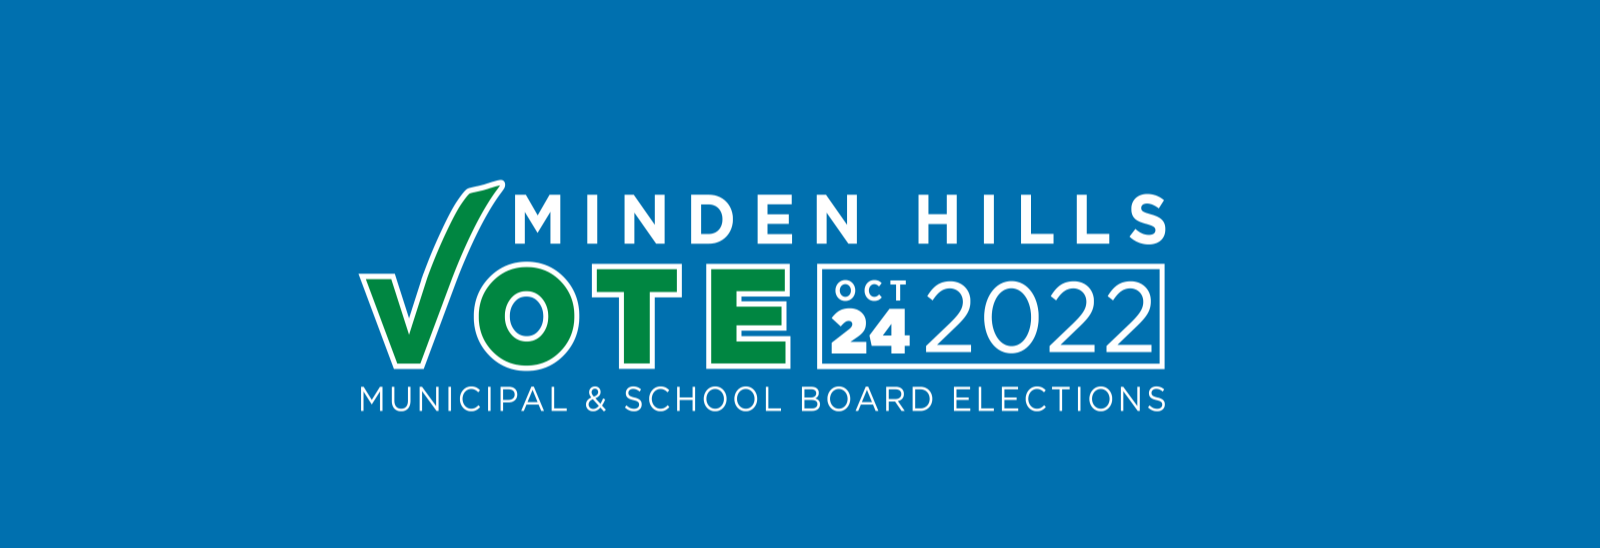 Minden Hills Municipal and School Board 2022 Election